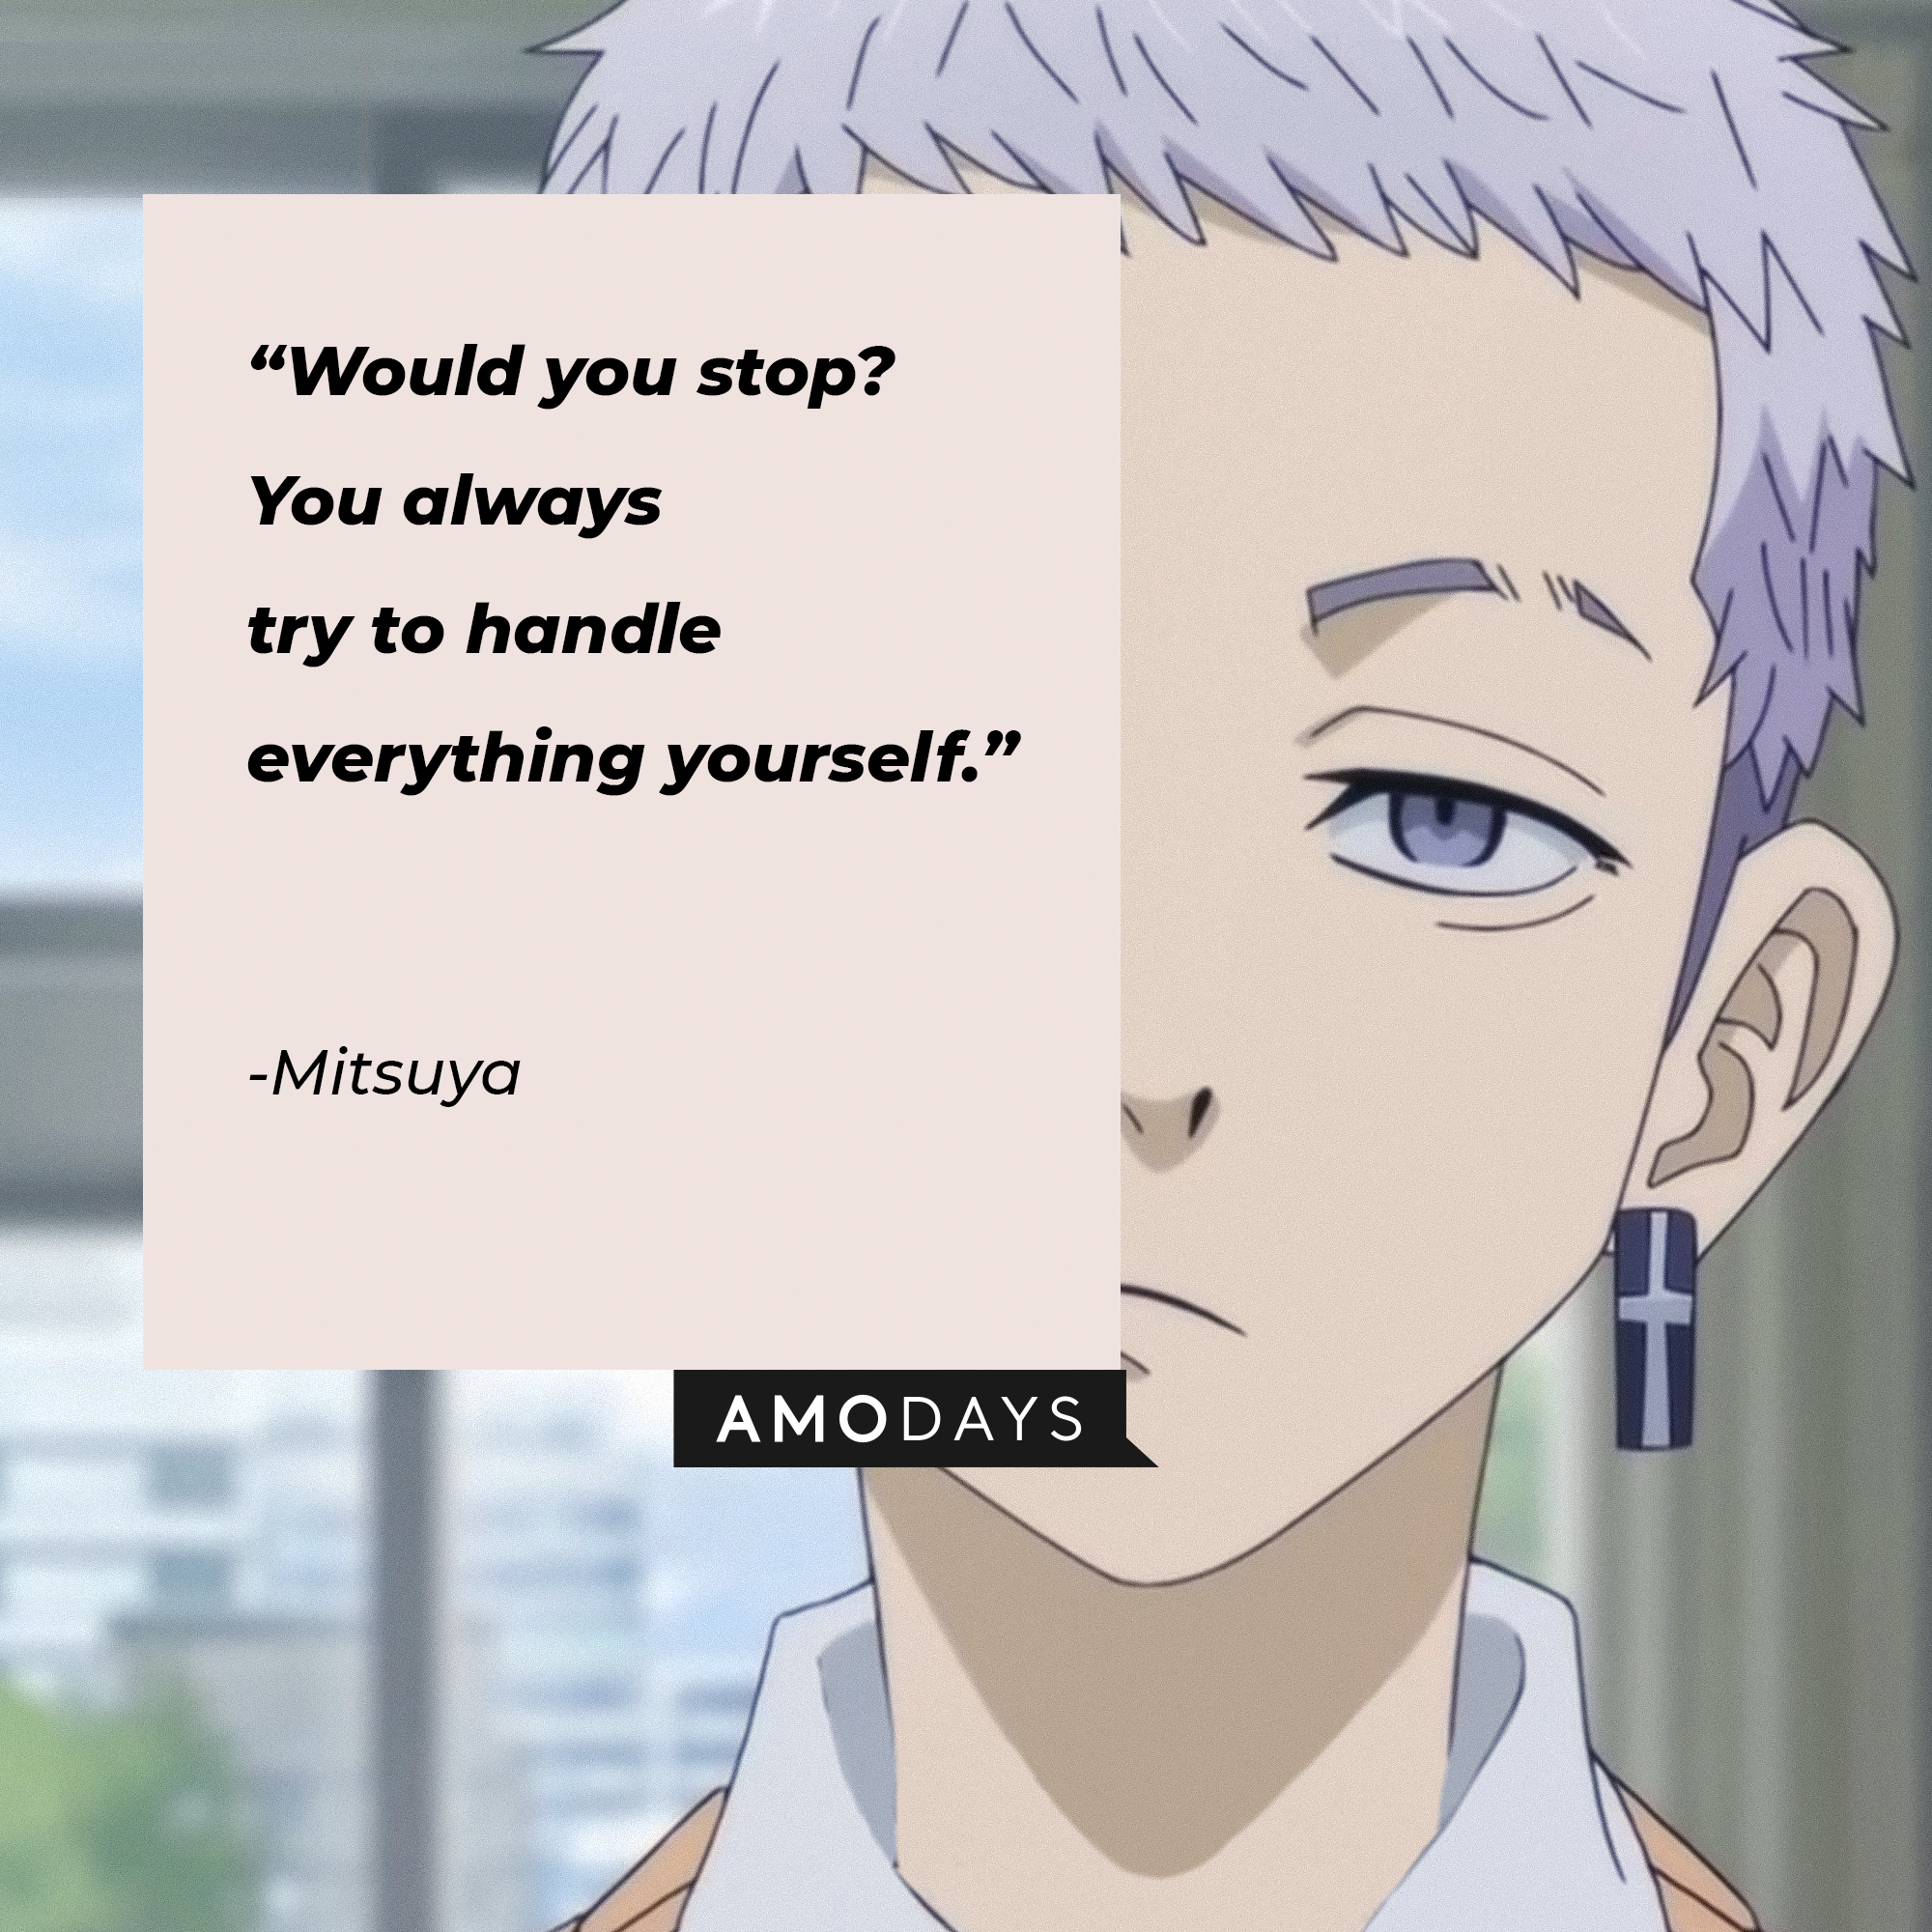 Mitsuya's quote: "Would you stop? You always try to handle everything yourself." | Source: Youtube.com/Crunchyroll Collection